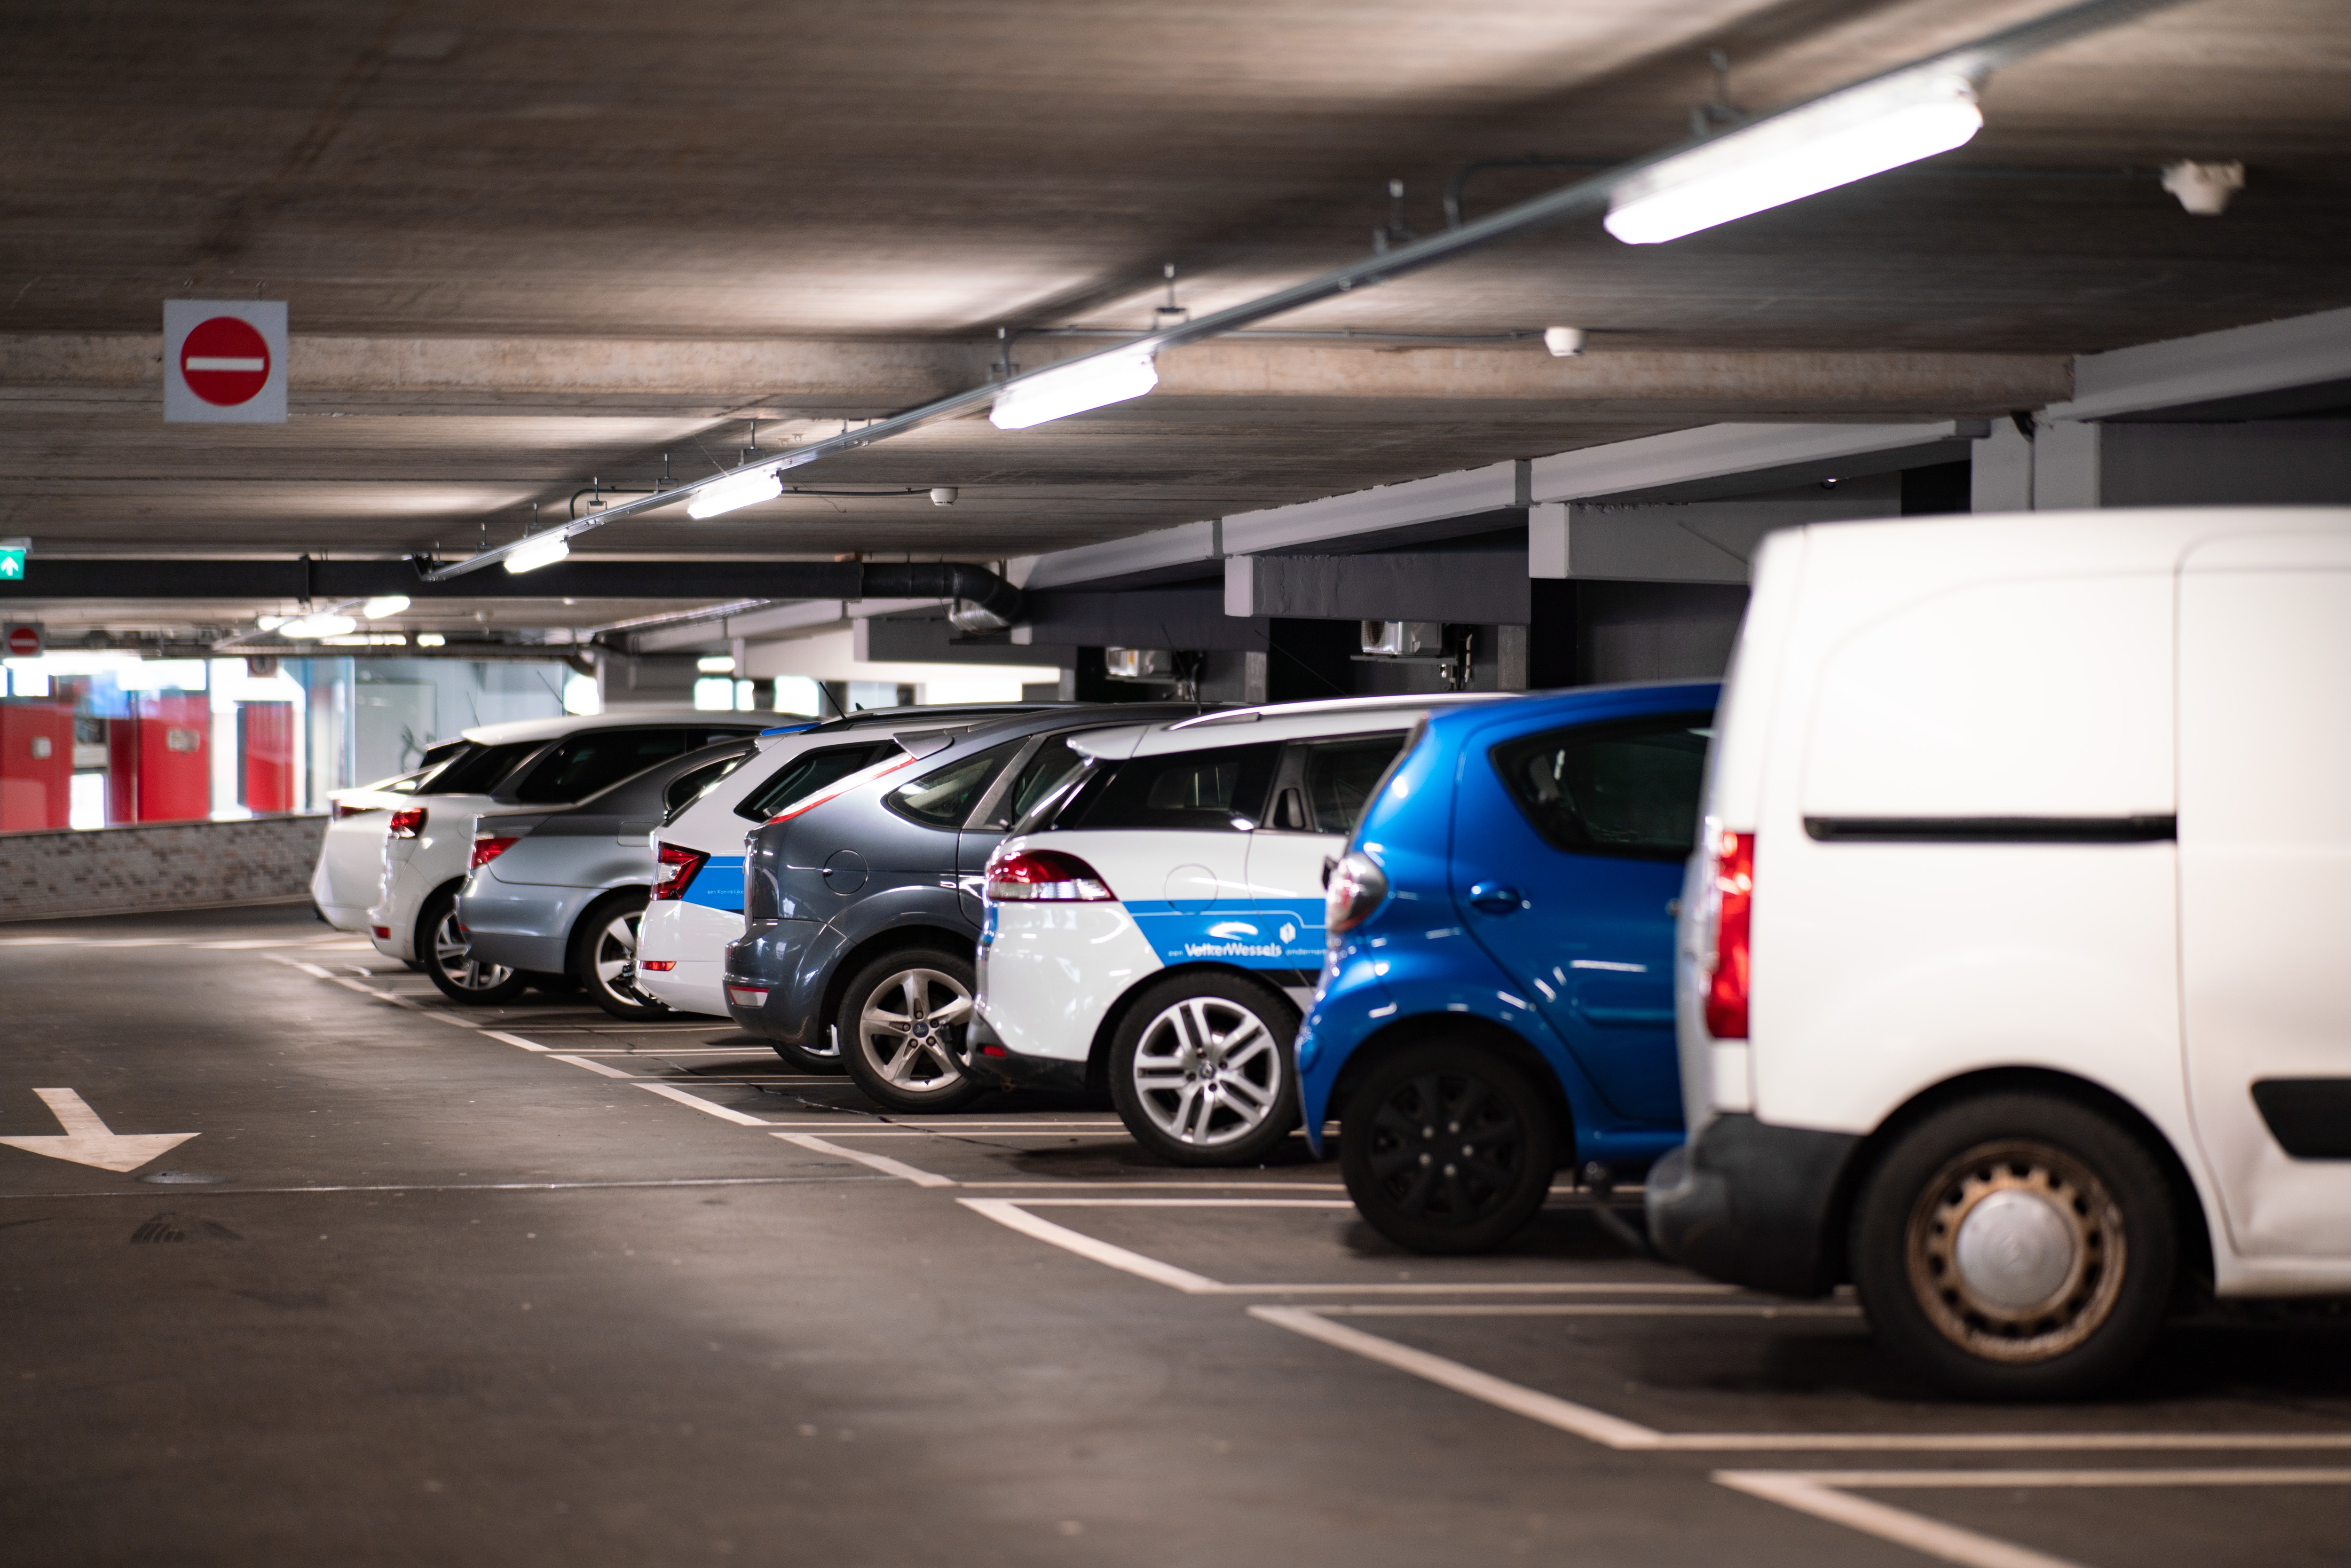 Photo of a row of cars parked in a car park